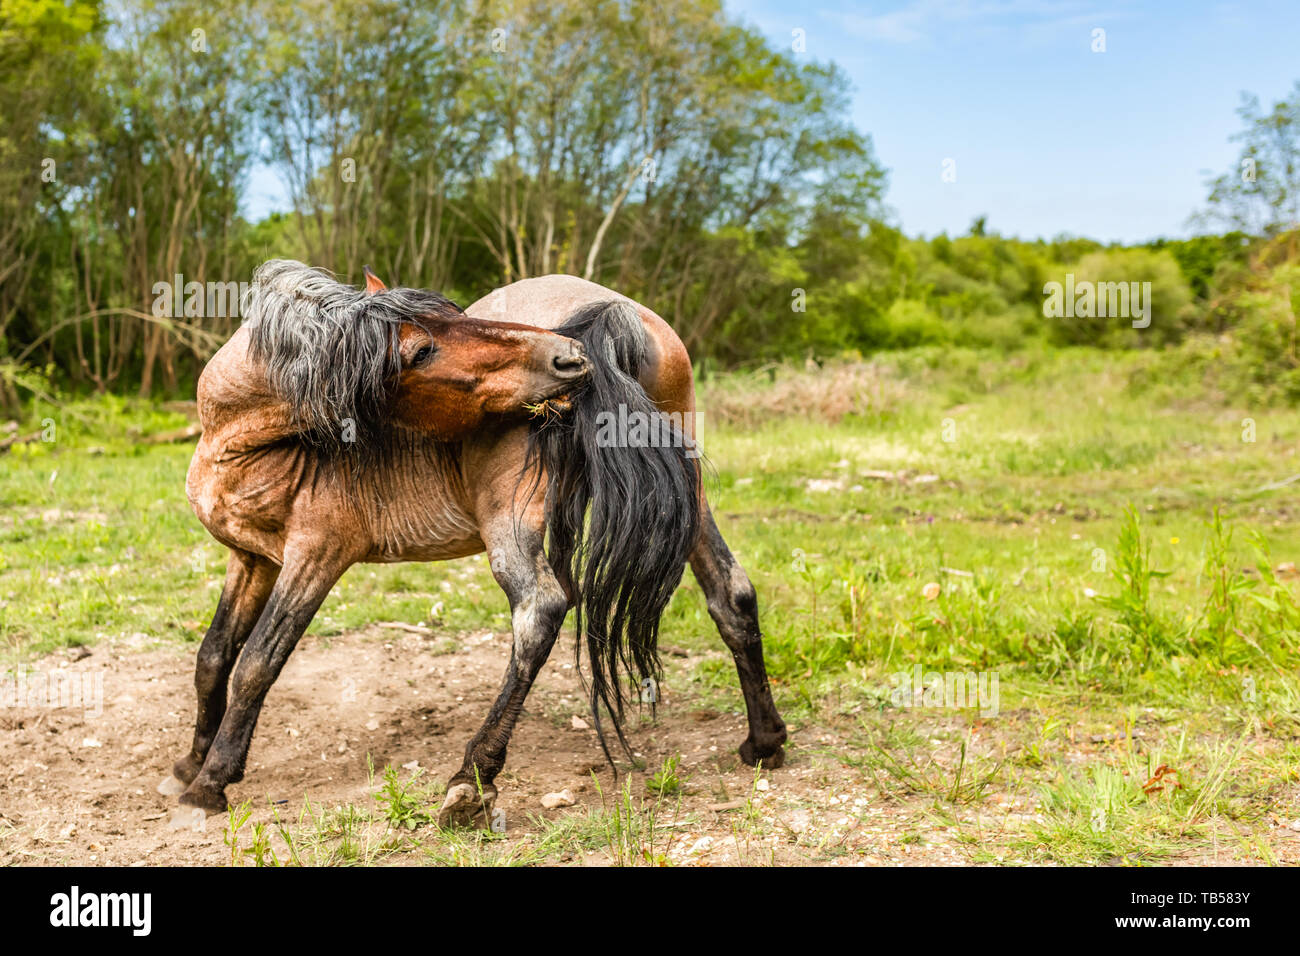 Candid animal portrait of brown wild pony side-on stretching to groom itself. Taken in Dorset, England. Stock Photo